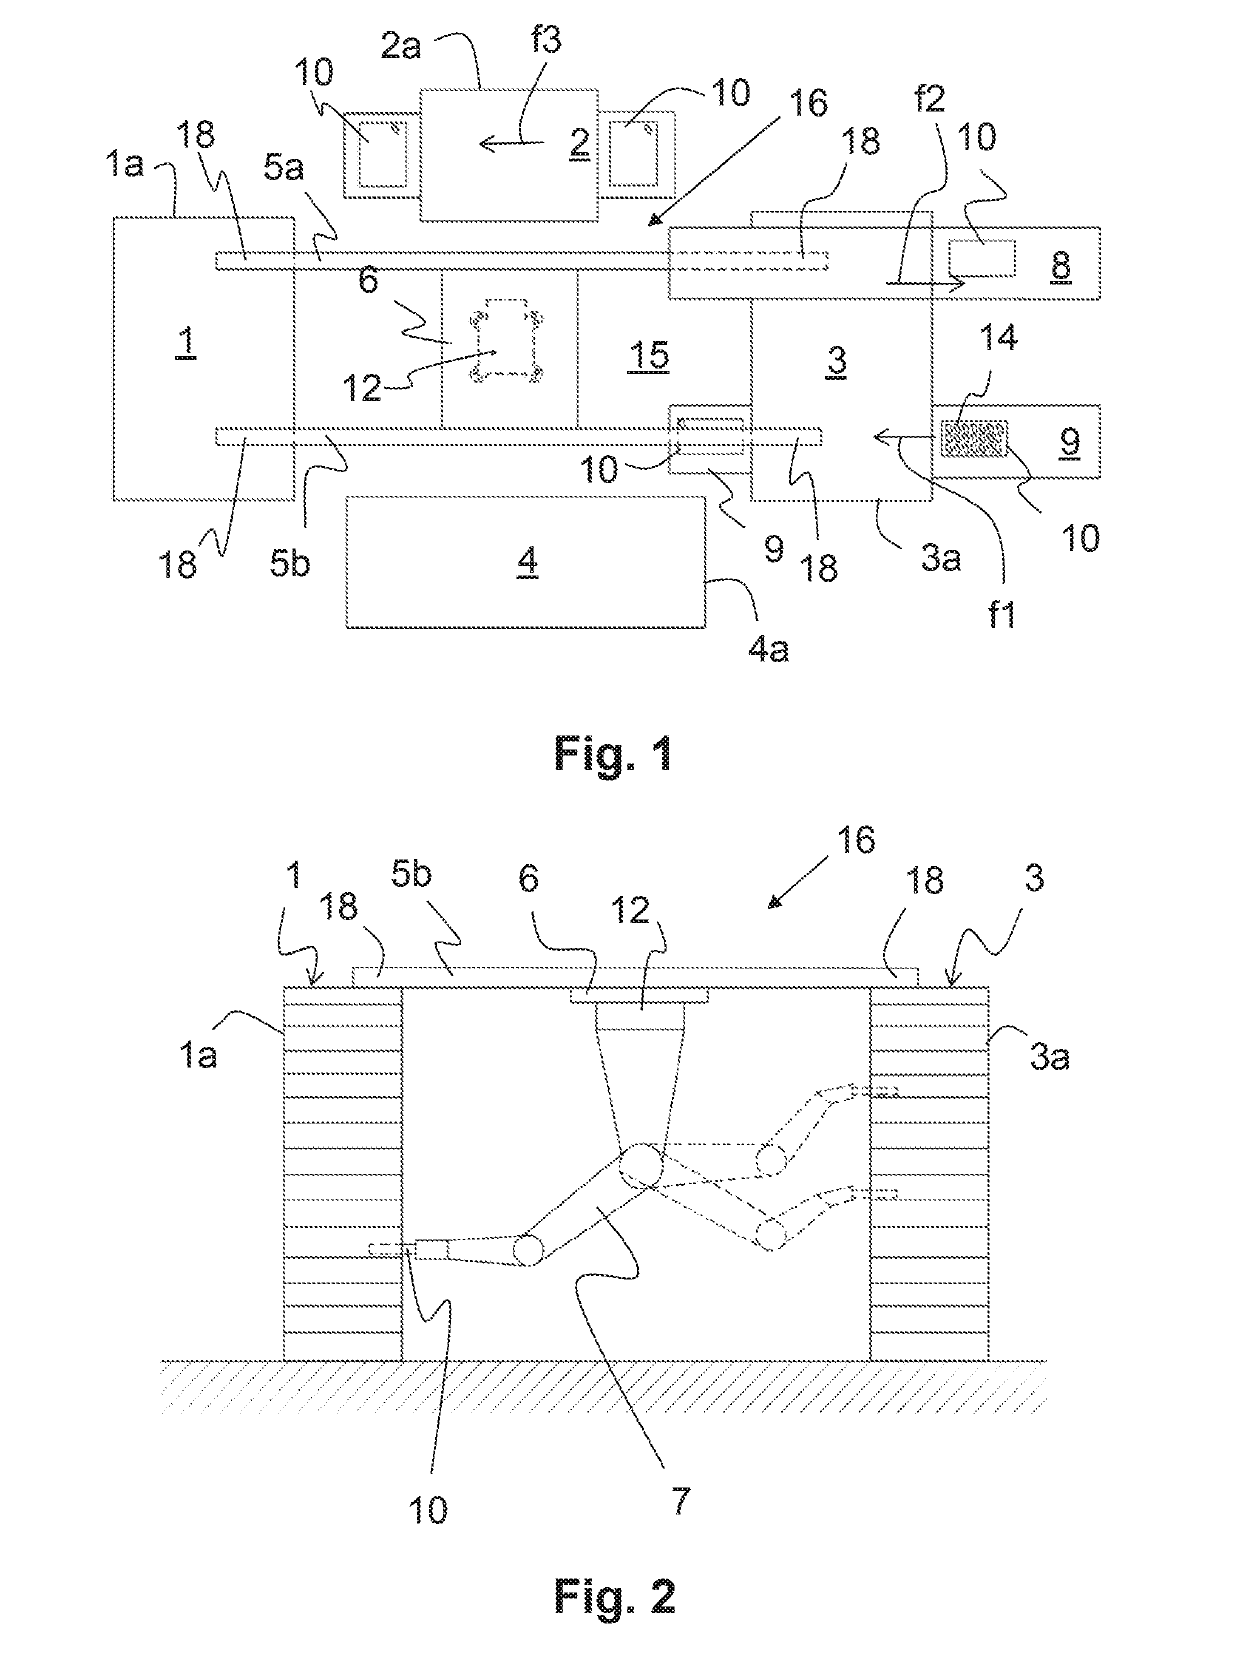 Device for storing, baking, and discharging bakery goods